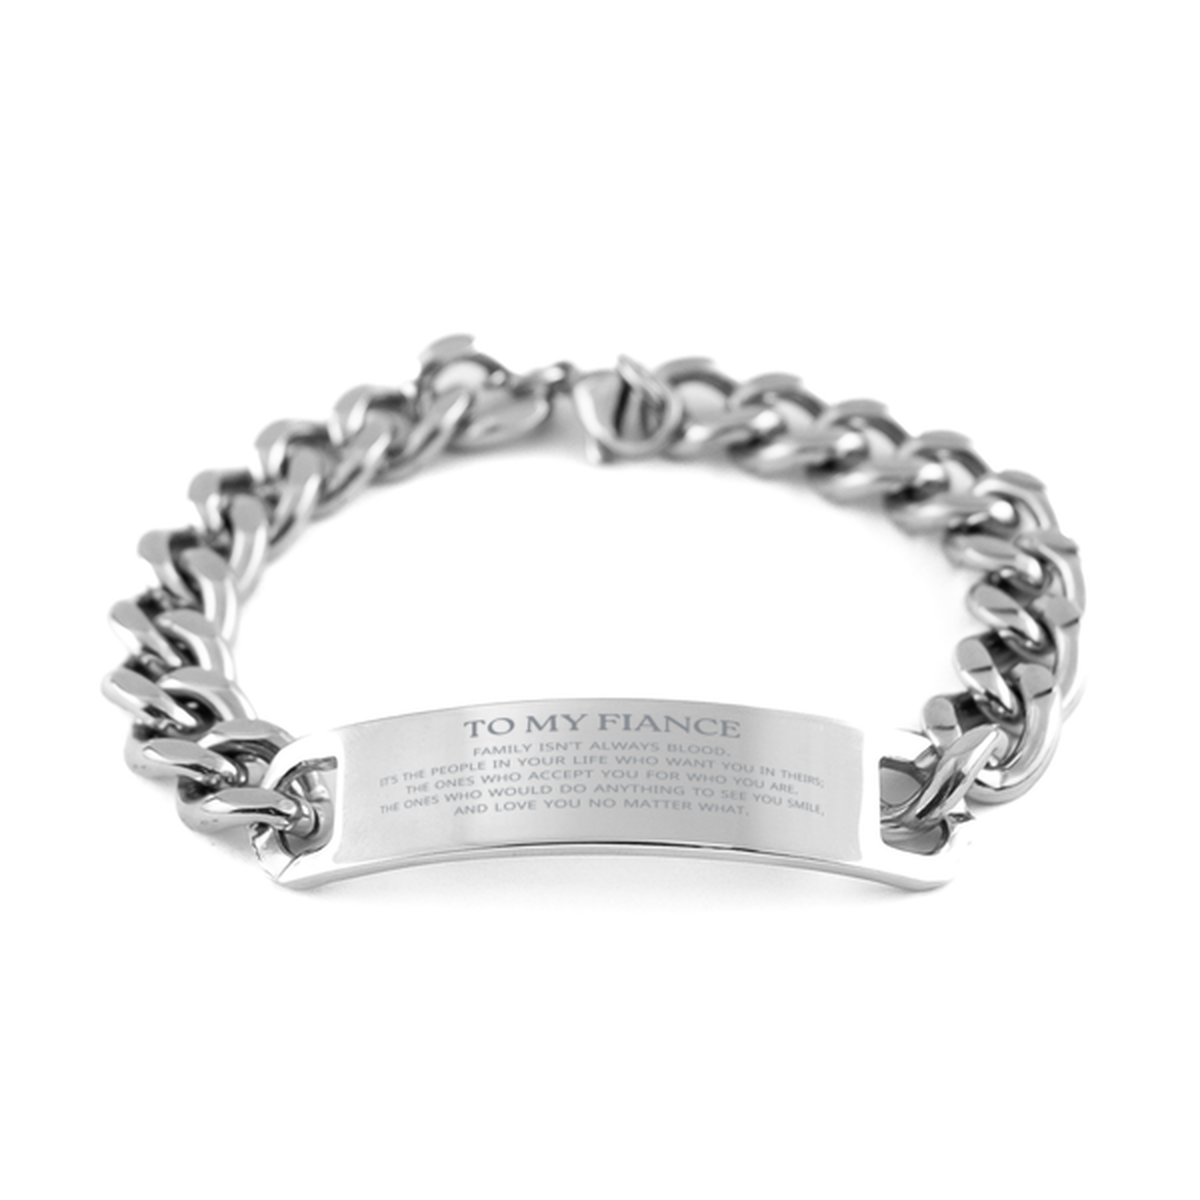 To My Fiance Gifts, Family isn't always blood, Fiance Cuban Chain Stainless Steel Bracelet, Birthday Christmas Unique Present For Fiance